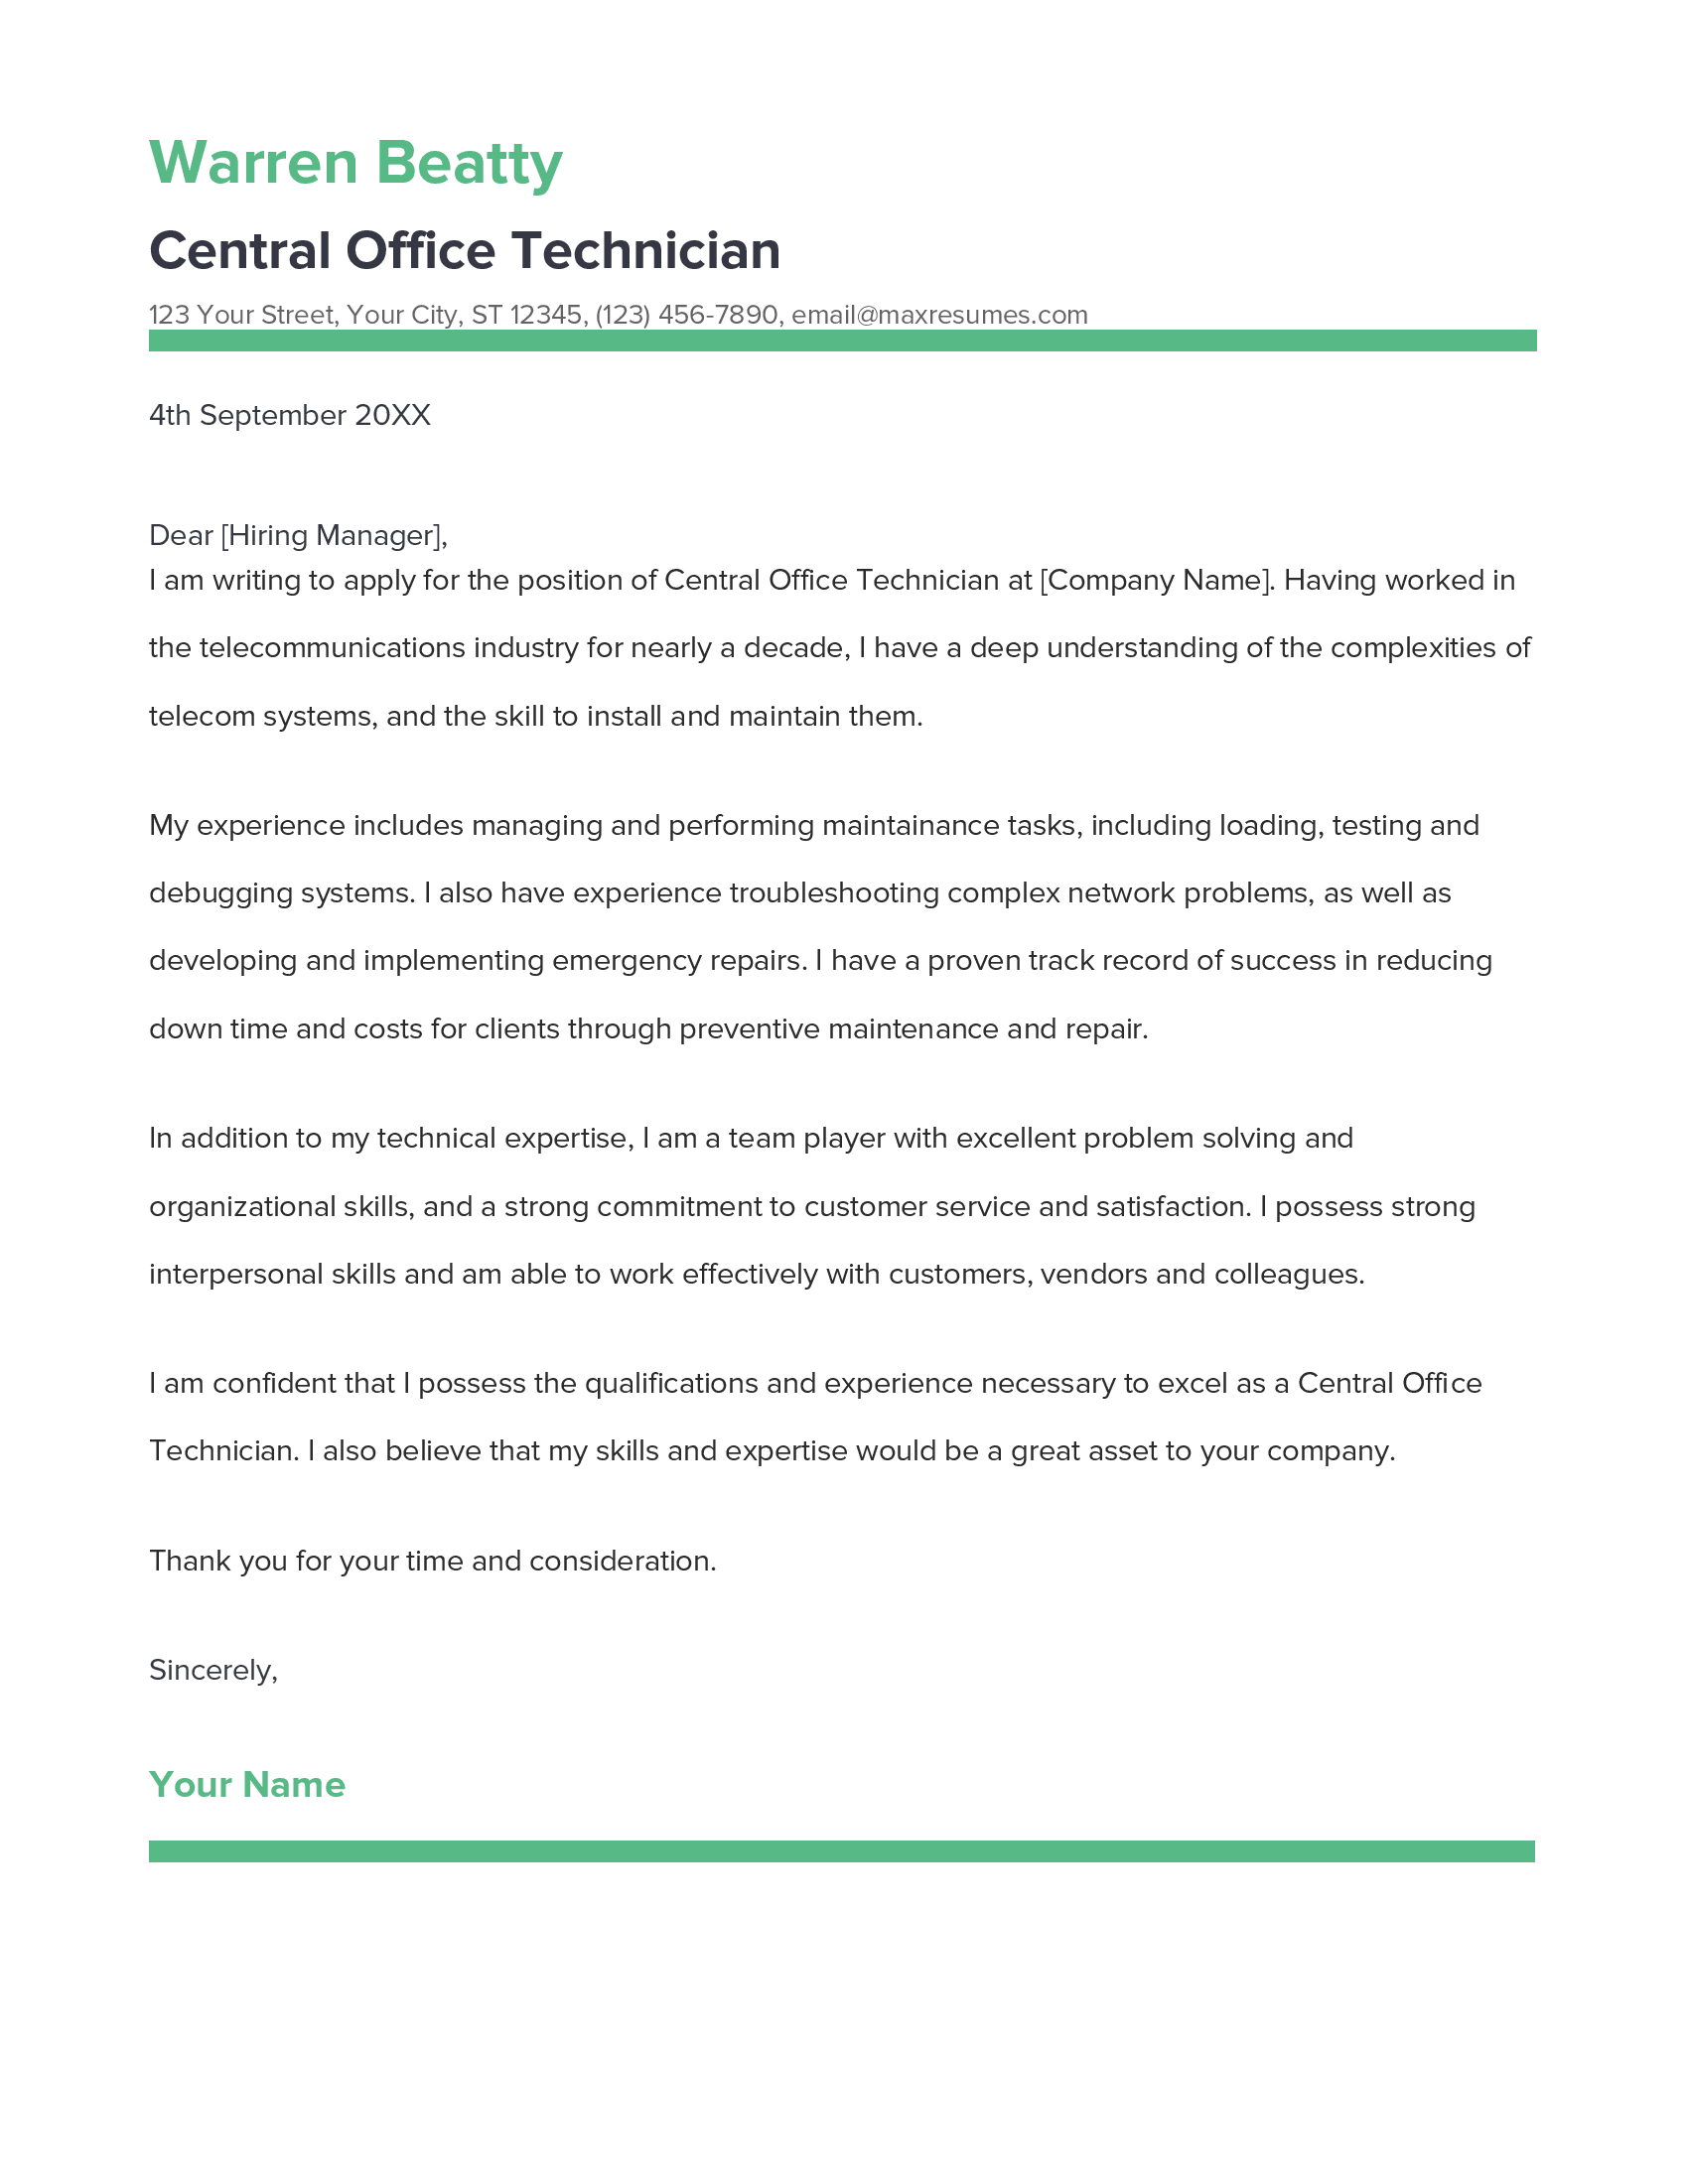 Central Office Technician Cover Letter Example